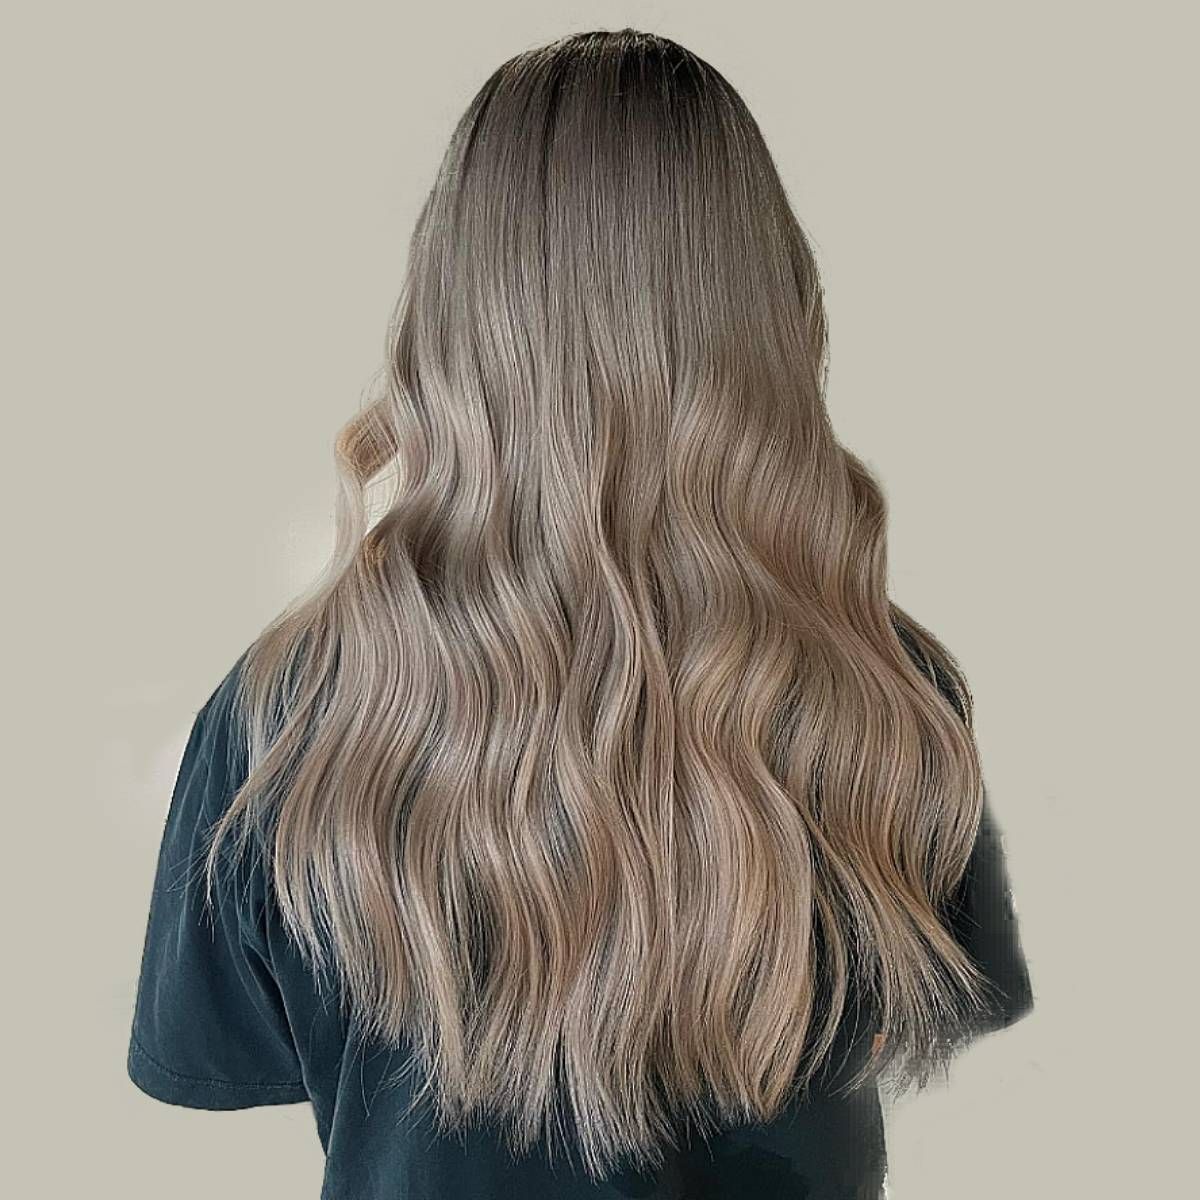 44 Types Of Ash Blonde Hair Colors & Trendy Ways To Get It Throughout Choppy Ash Blonde Lob (View 19 of 25)